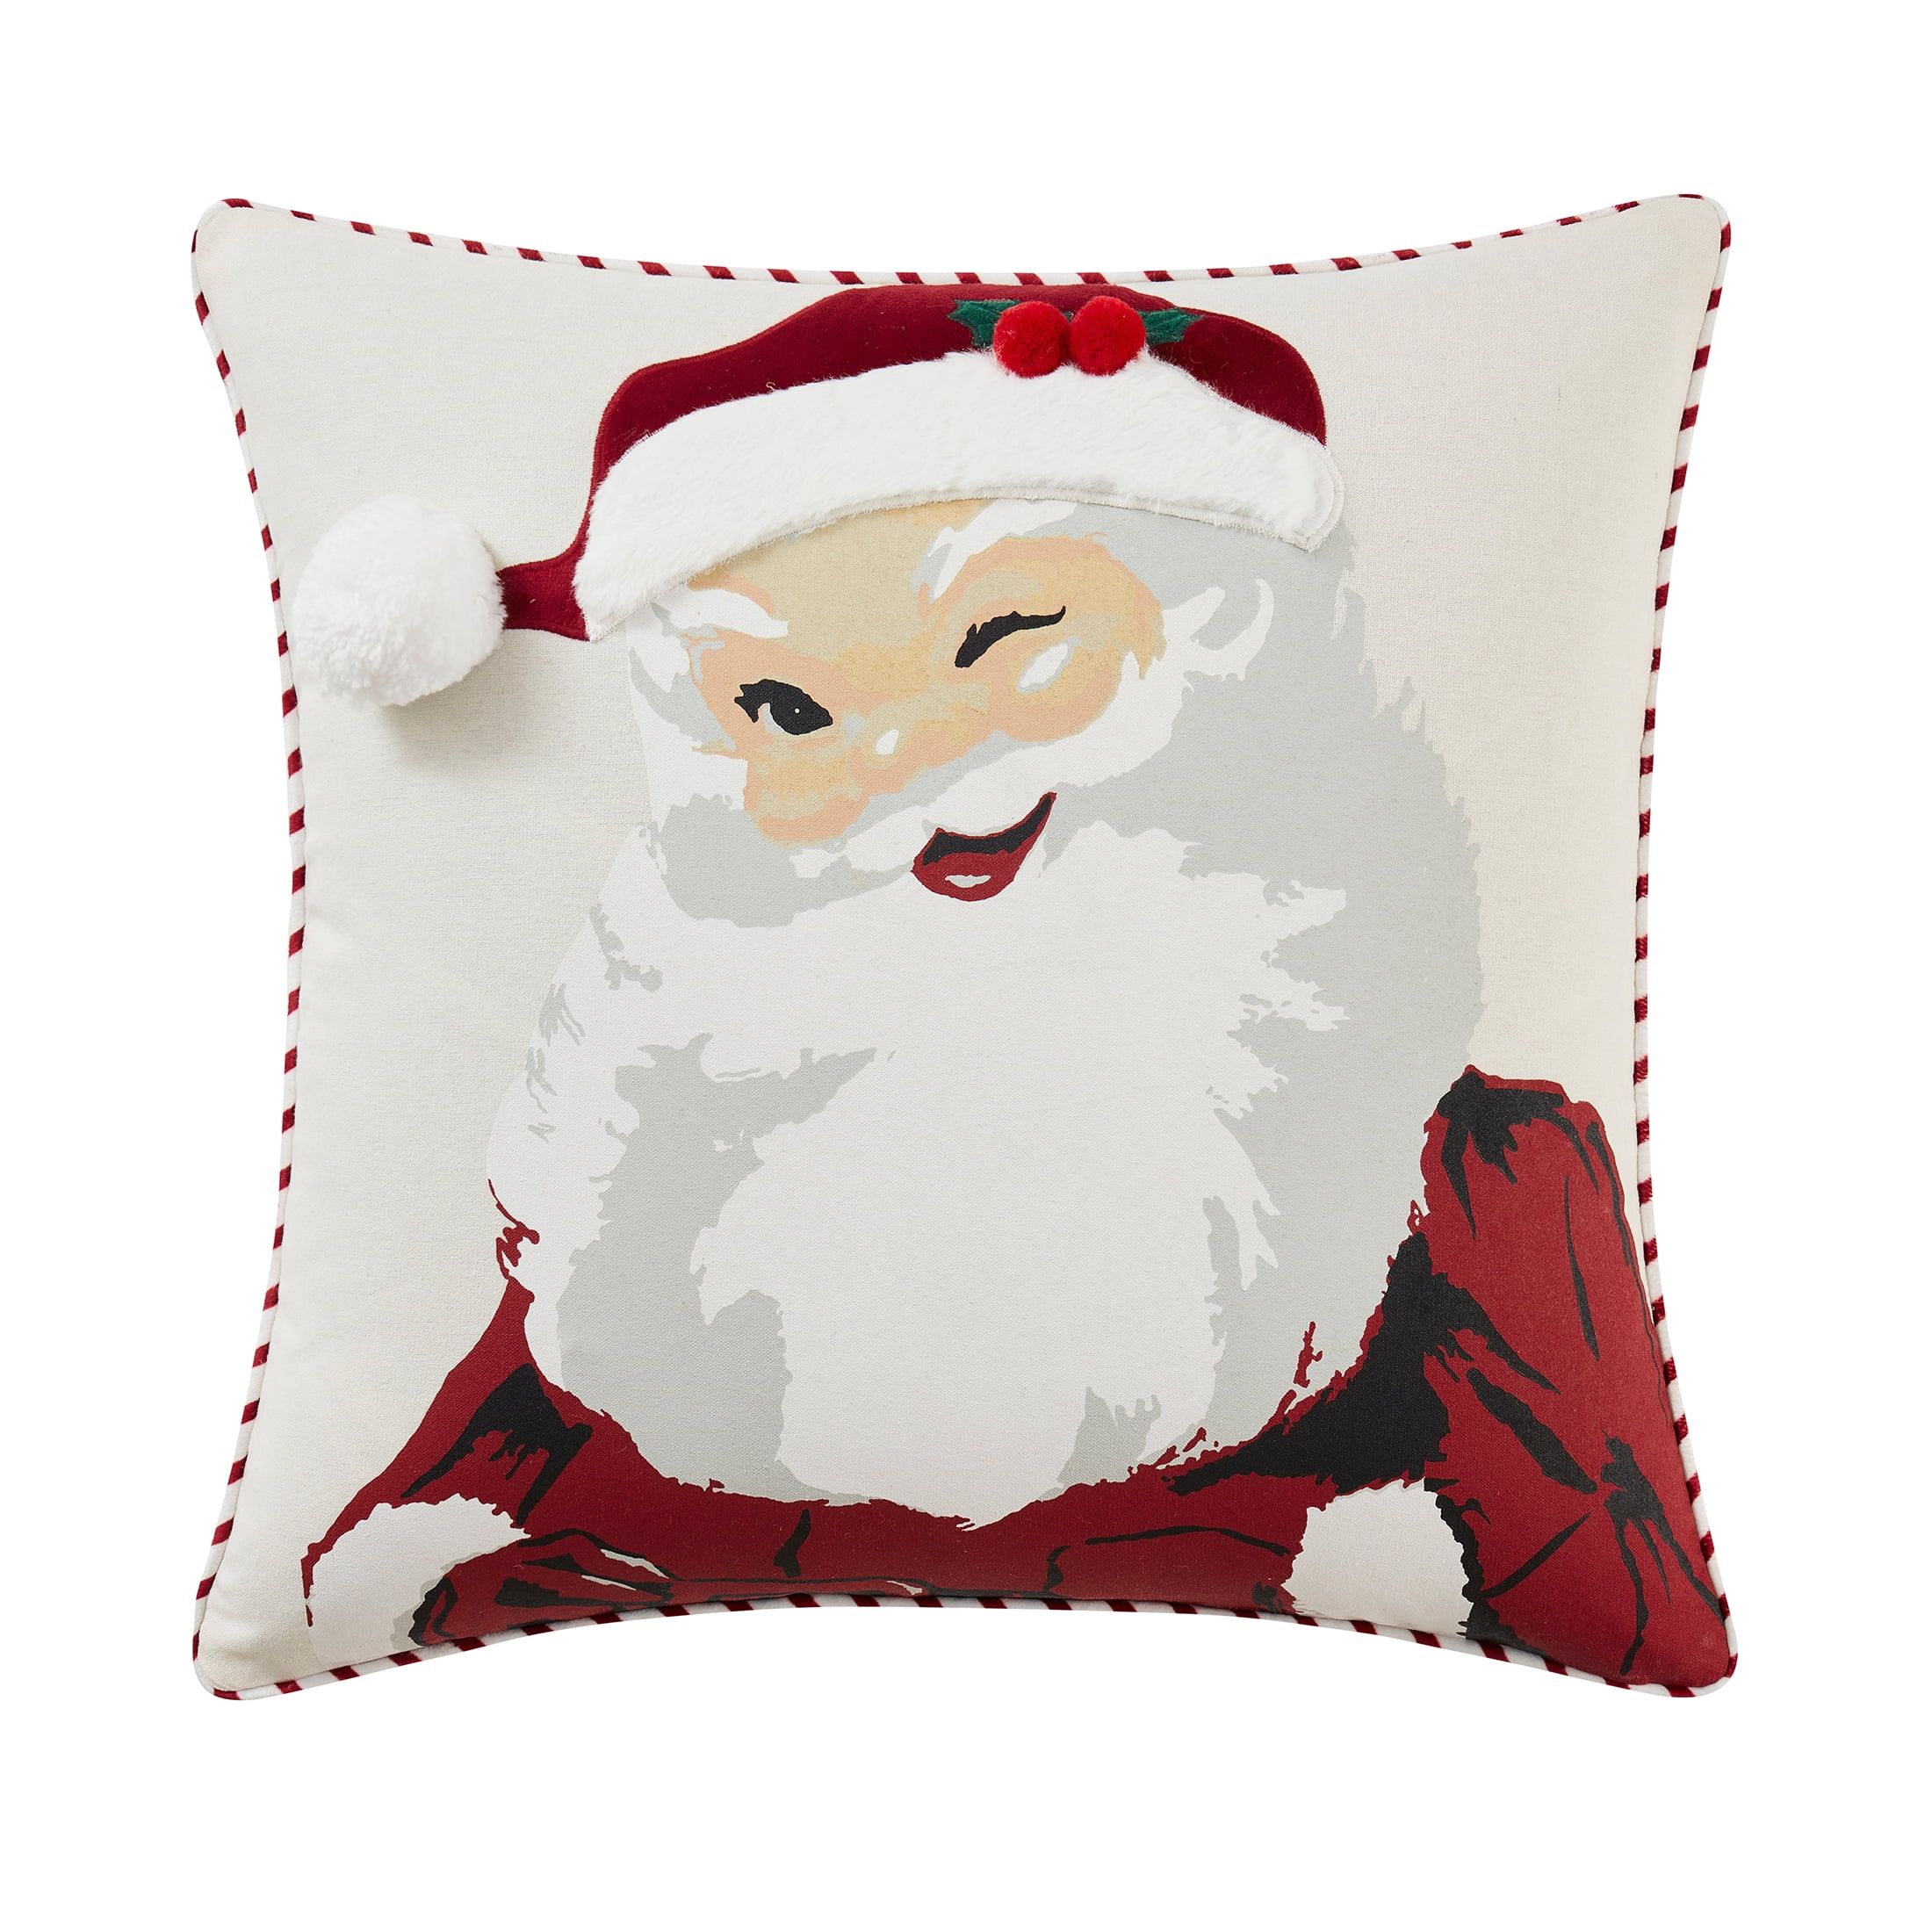 My Texas House Jolly Santa 20" x 20" White/Red Reversible Decorative Pillow Cover | Walmart (US)